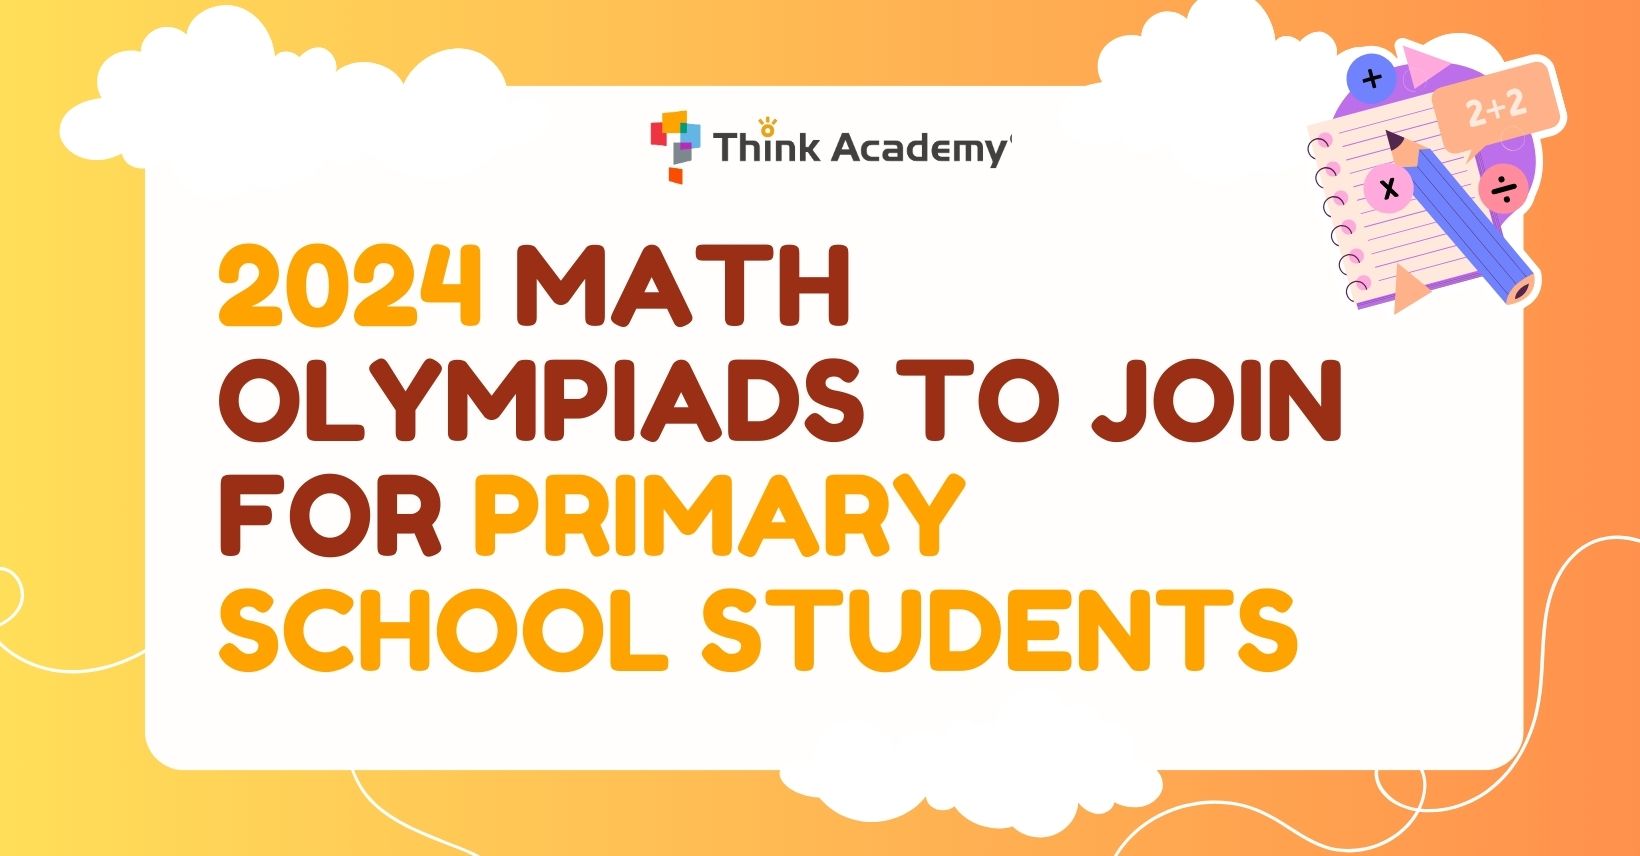 2024 Math Olympiads To Join for Primary School Students